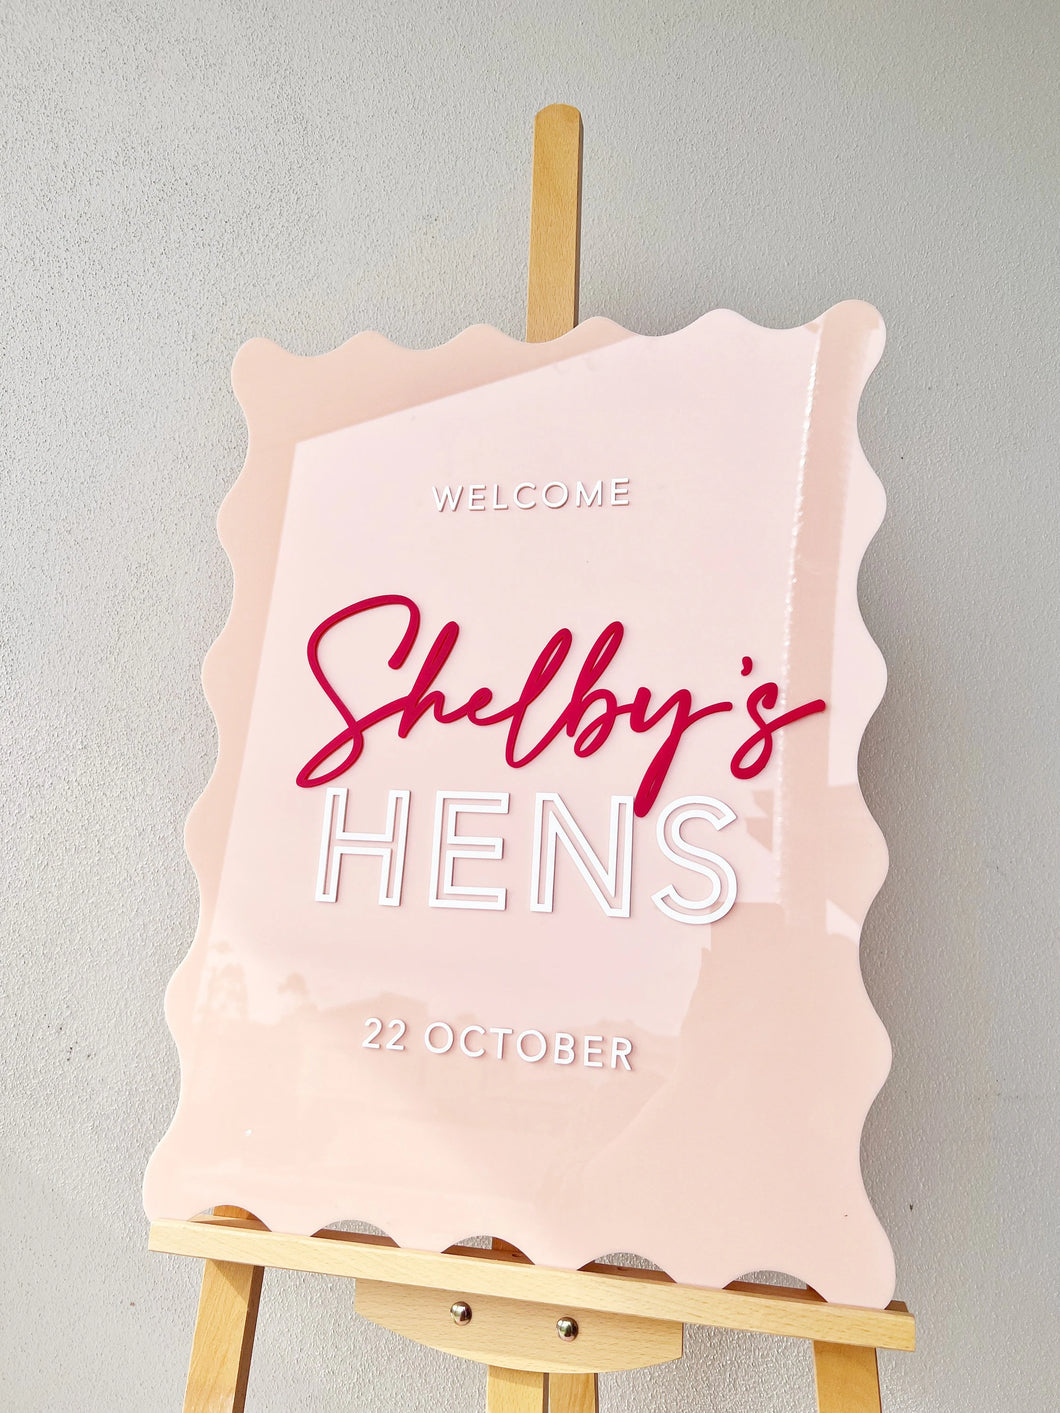 Hens Acrylic Welcome Sign | bridal Shower acrylic sign | event signage | hen decor